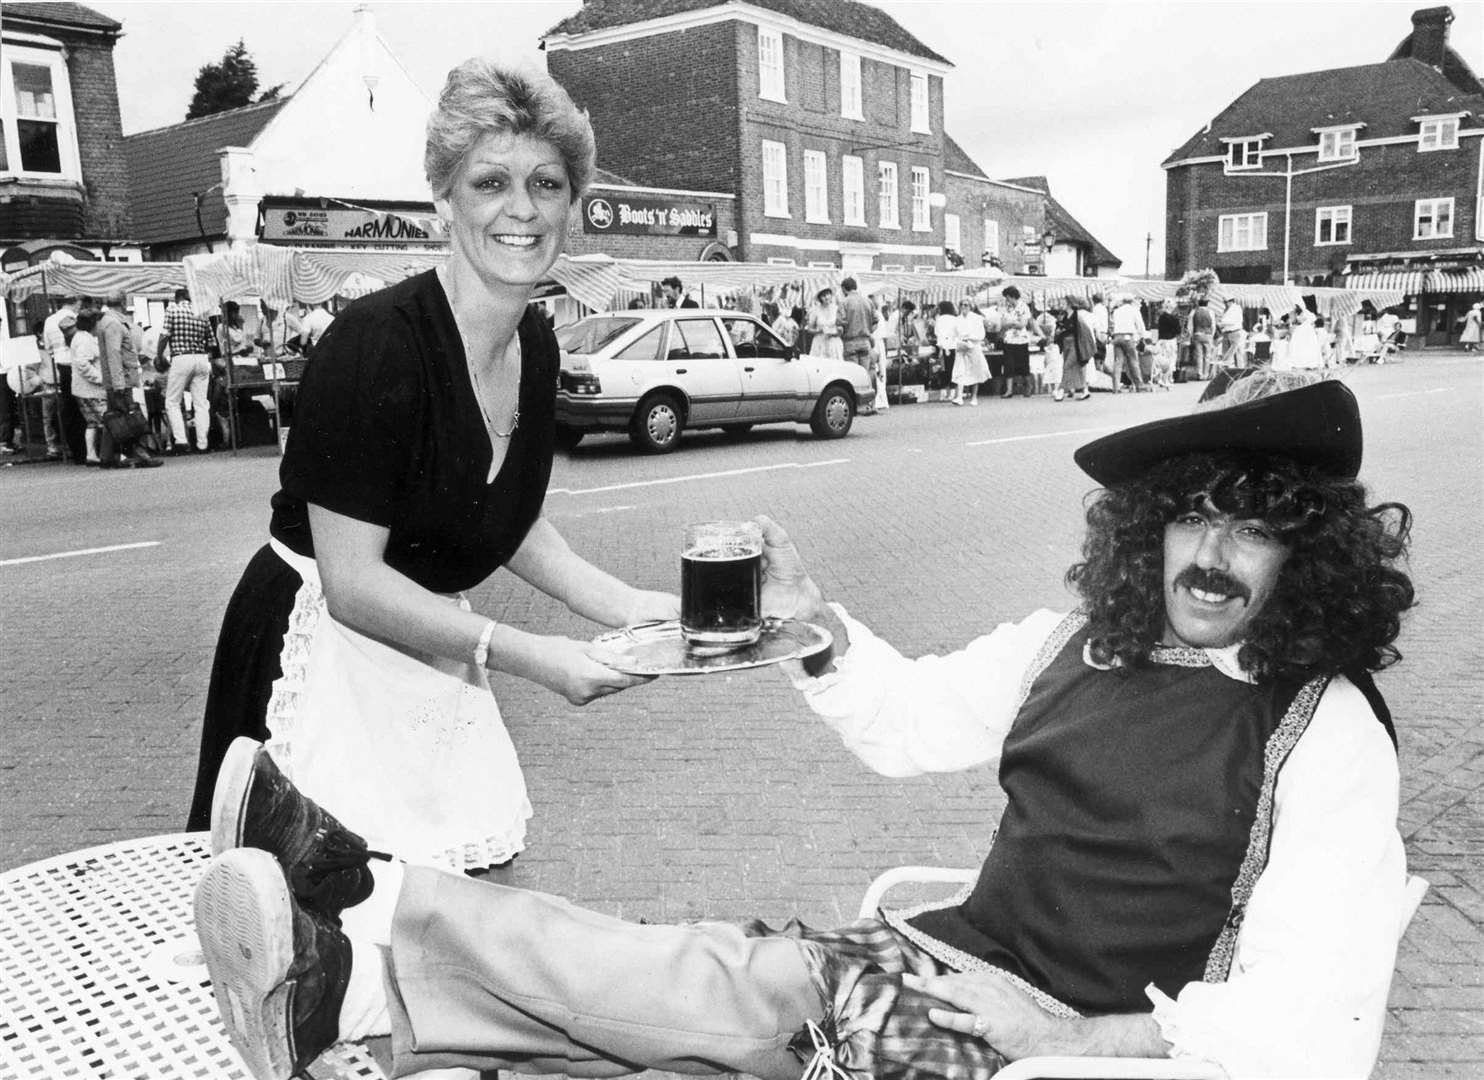 Sandra Hartman, landlady of The Bear, serves beer to her husband, a dandy for the day at the Dickens Festival in West Malling High Street in July 1988. It has since been renamed The Farmhouse